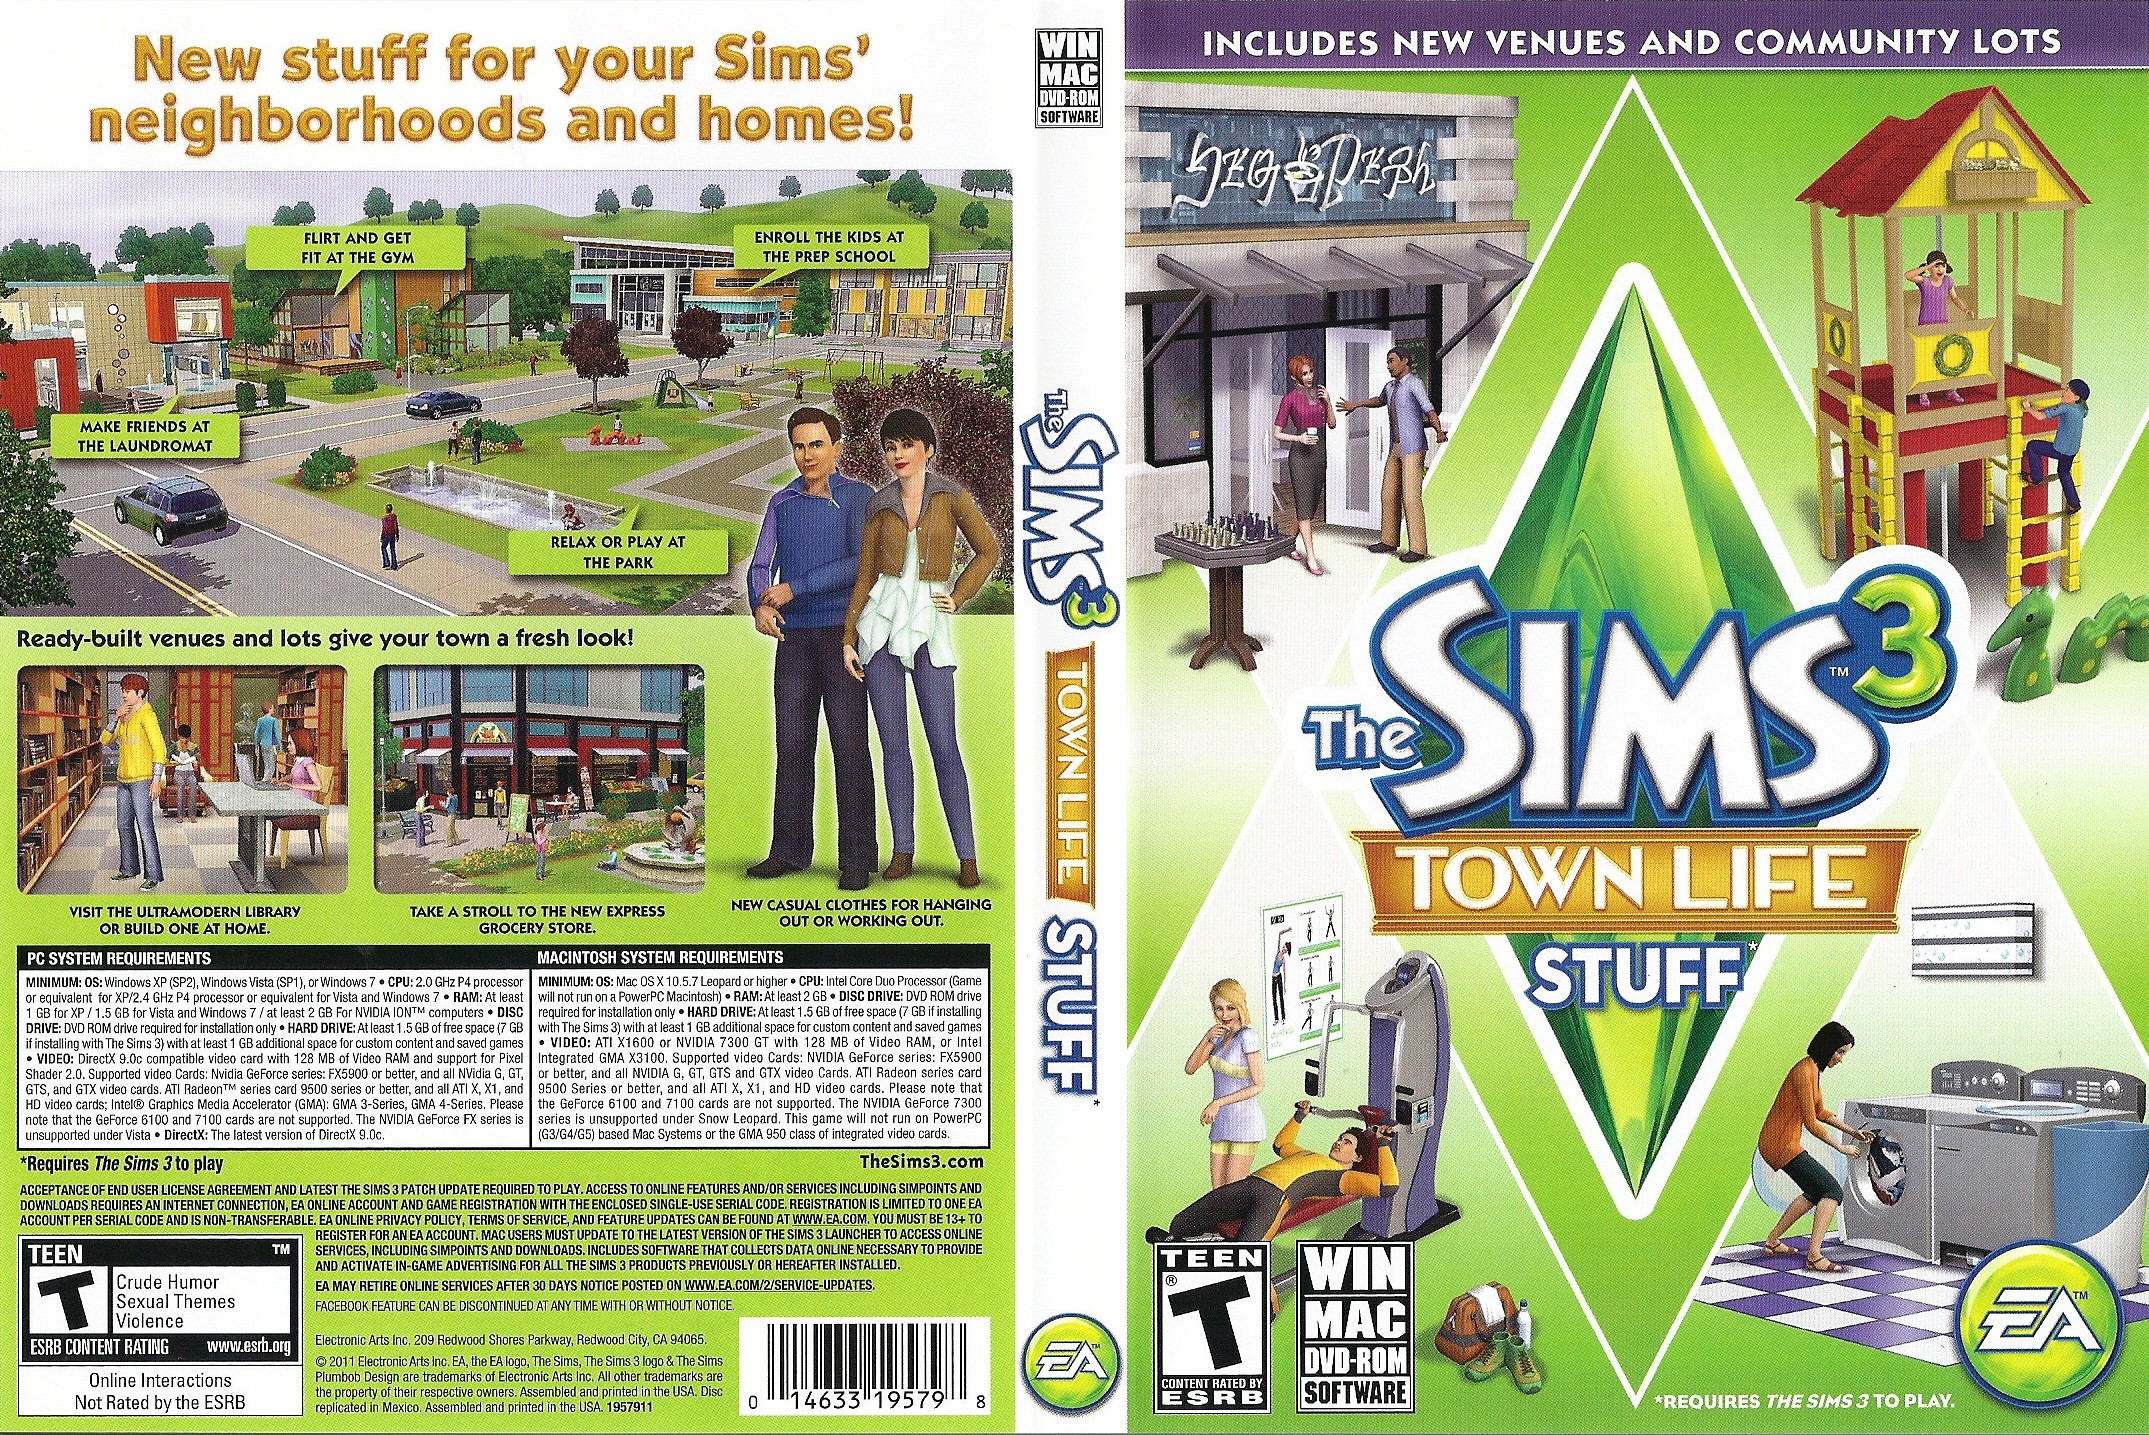 How To The Sims 1 For Free